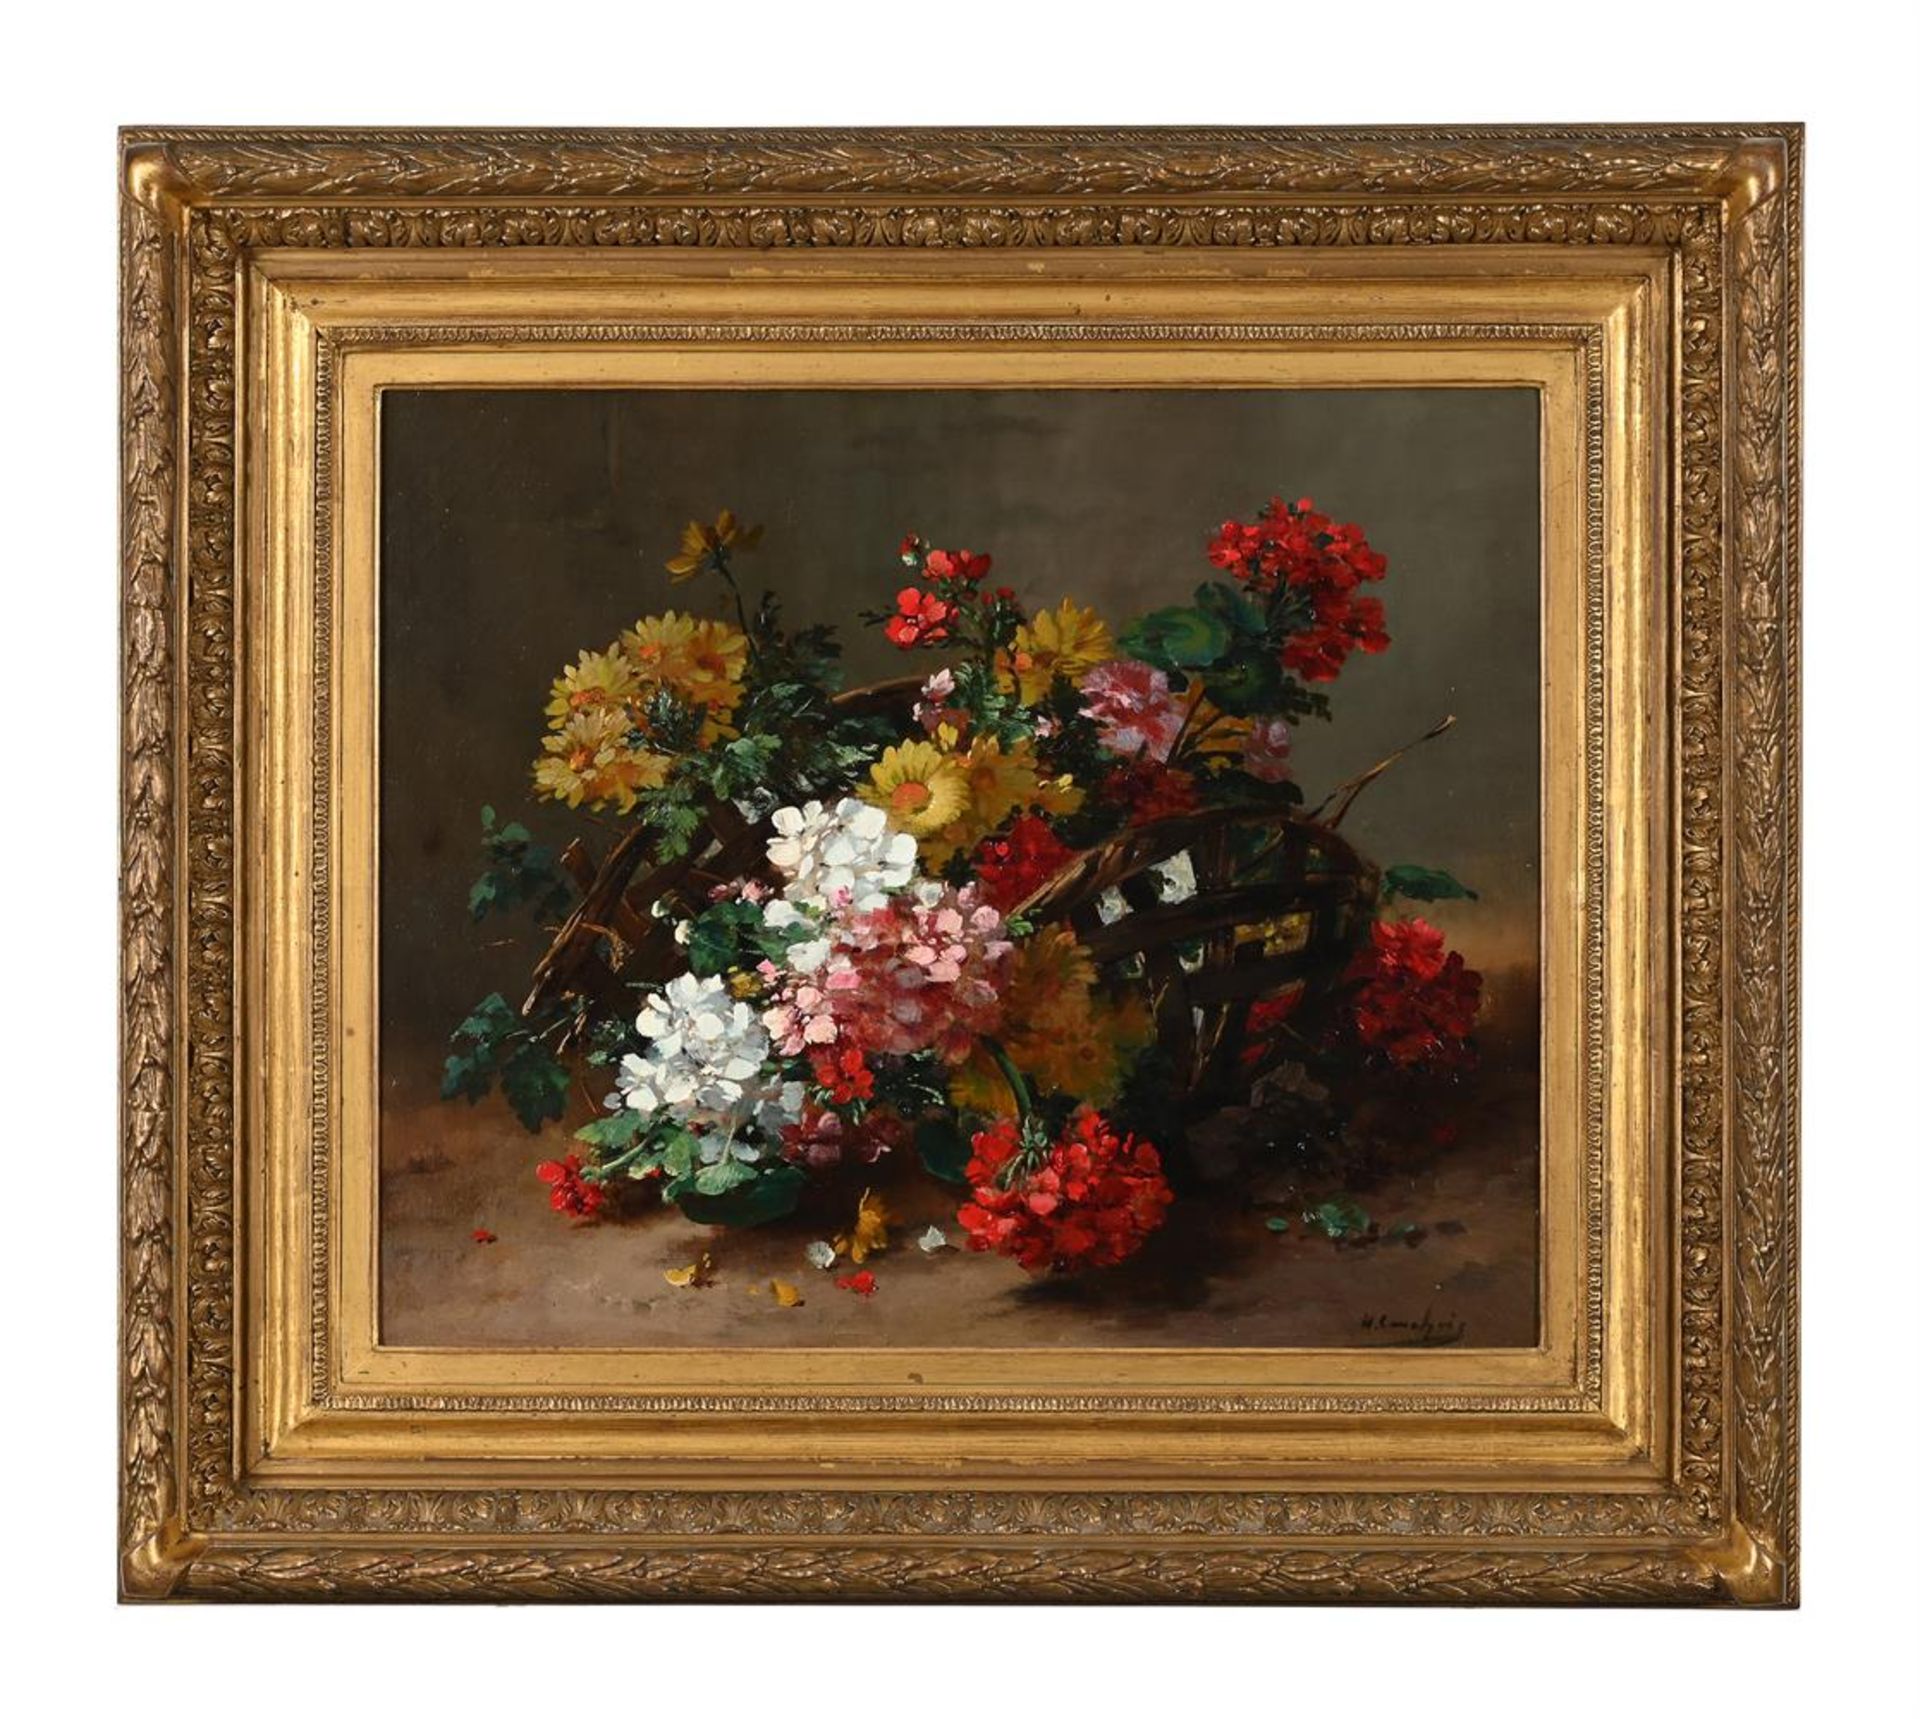 EUGÈNE HENRY CAUCHOIS (FRENCH 1850-1911), BASKET OF FLOWERS, A PAIR - Image 5 of 6